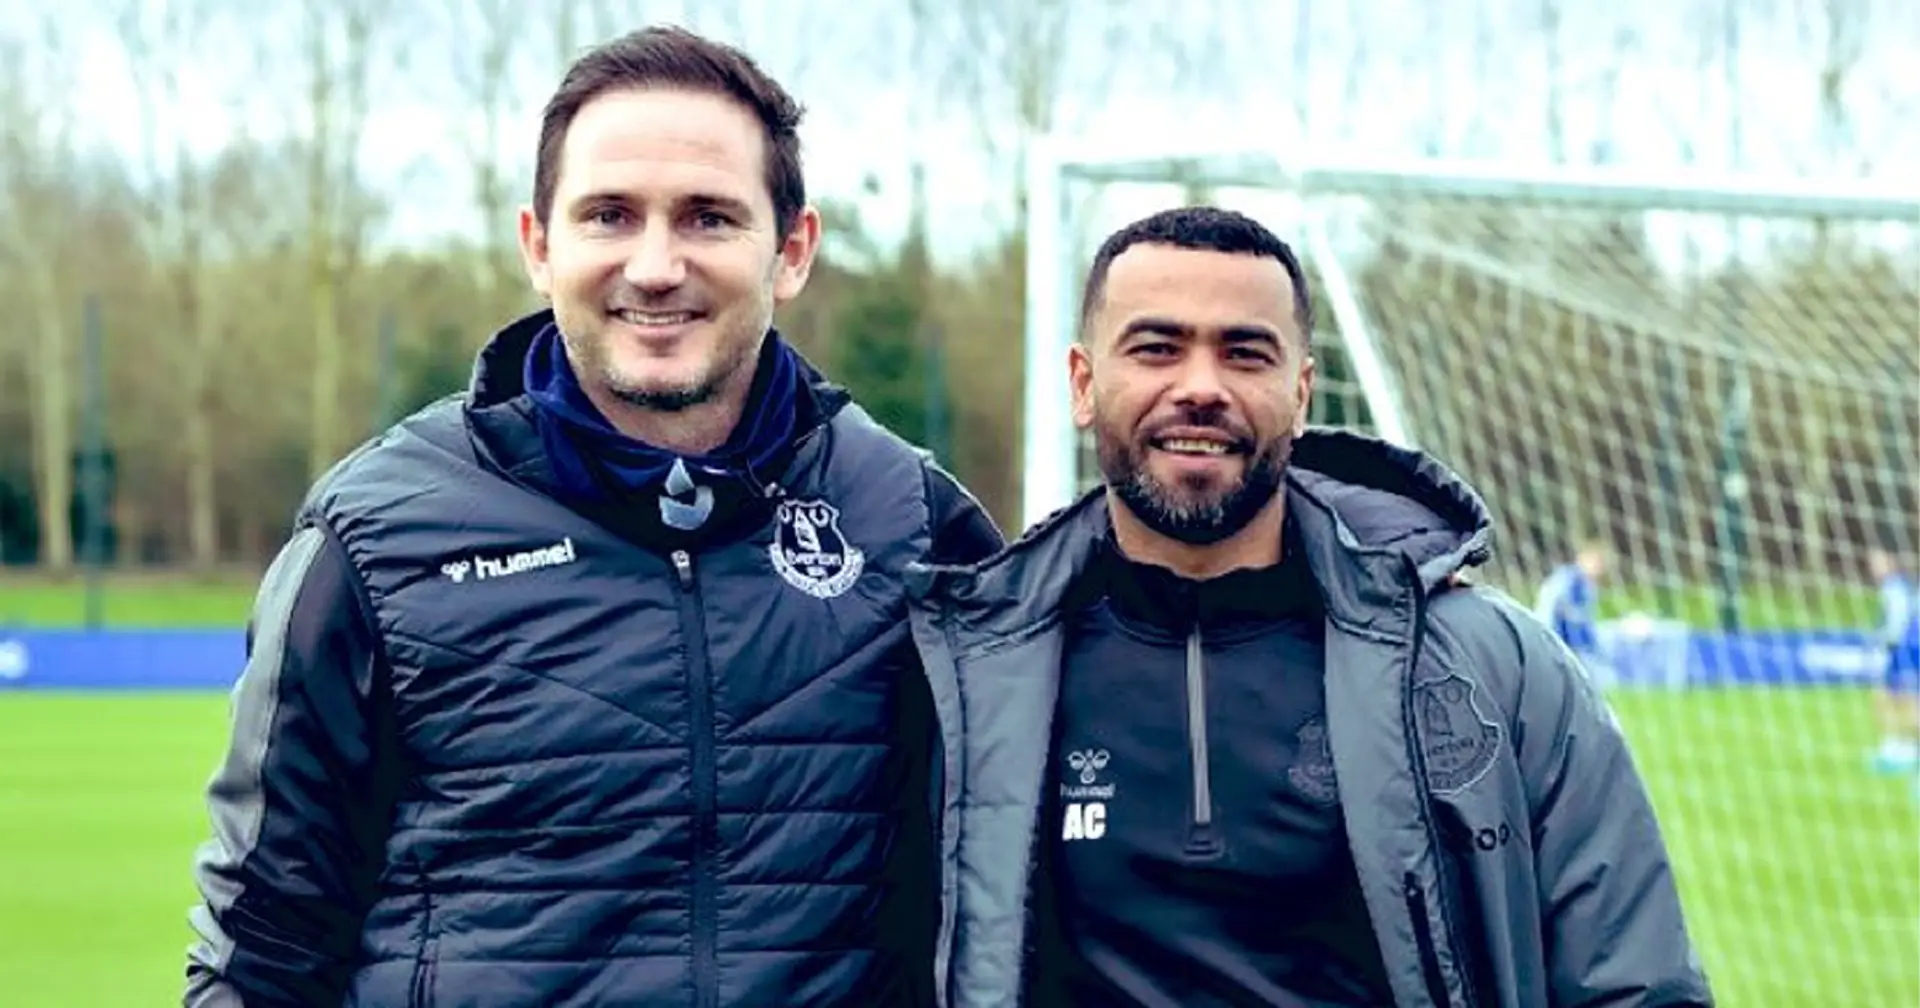 OFFICIAL: Ashley Cole leaves Chelsea academy to join Frank Lampard's coaching team at Everton